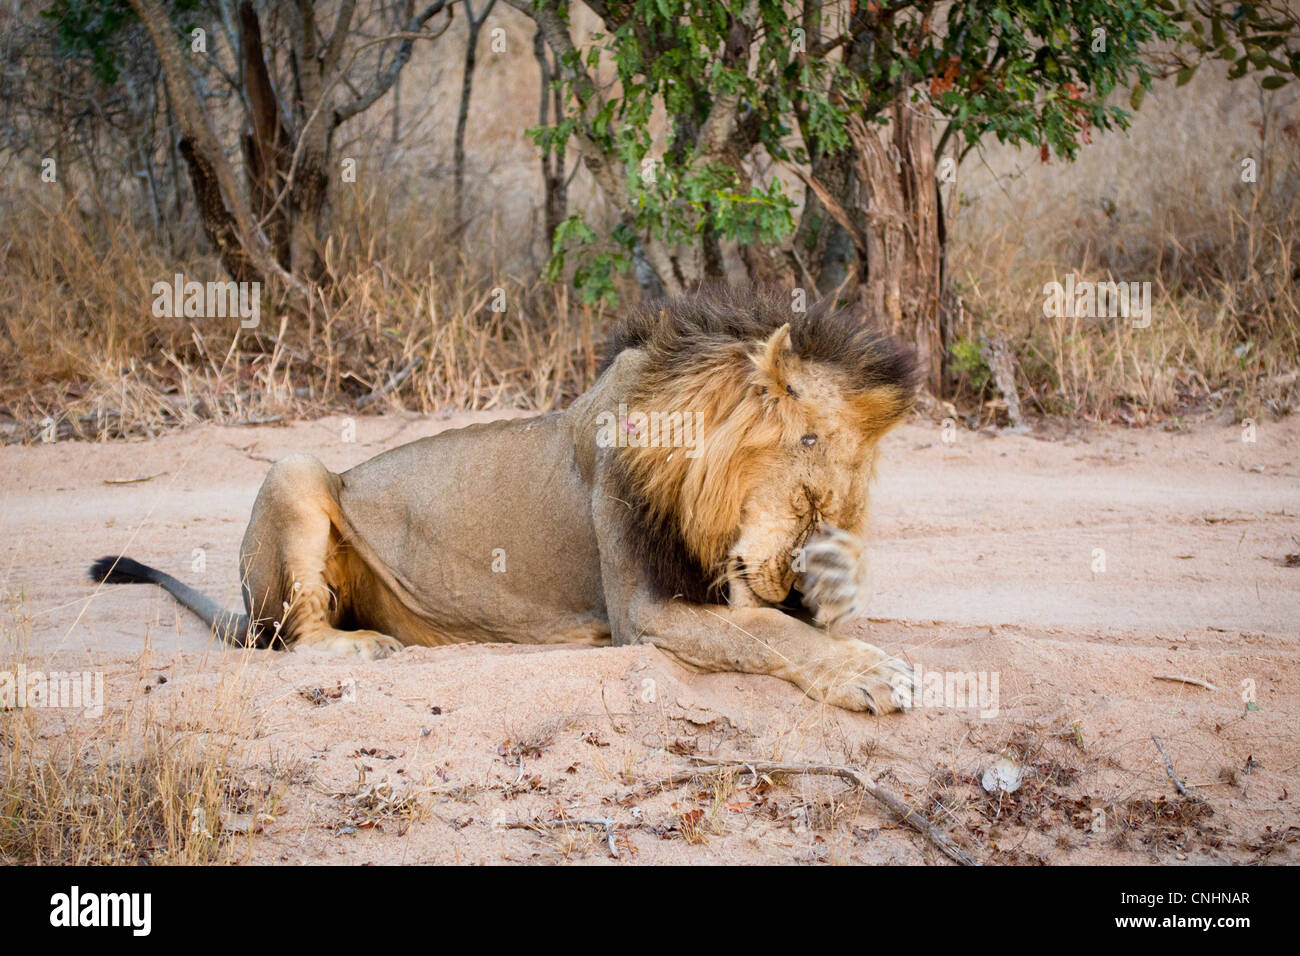 A male lion rubbing his face with his paw Stock Photo